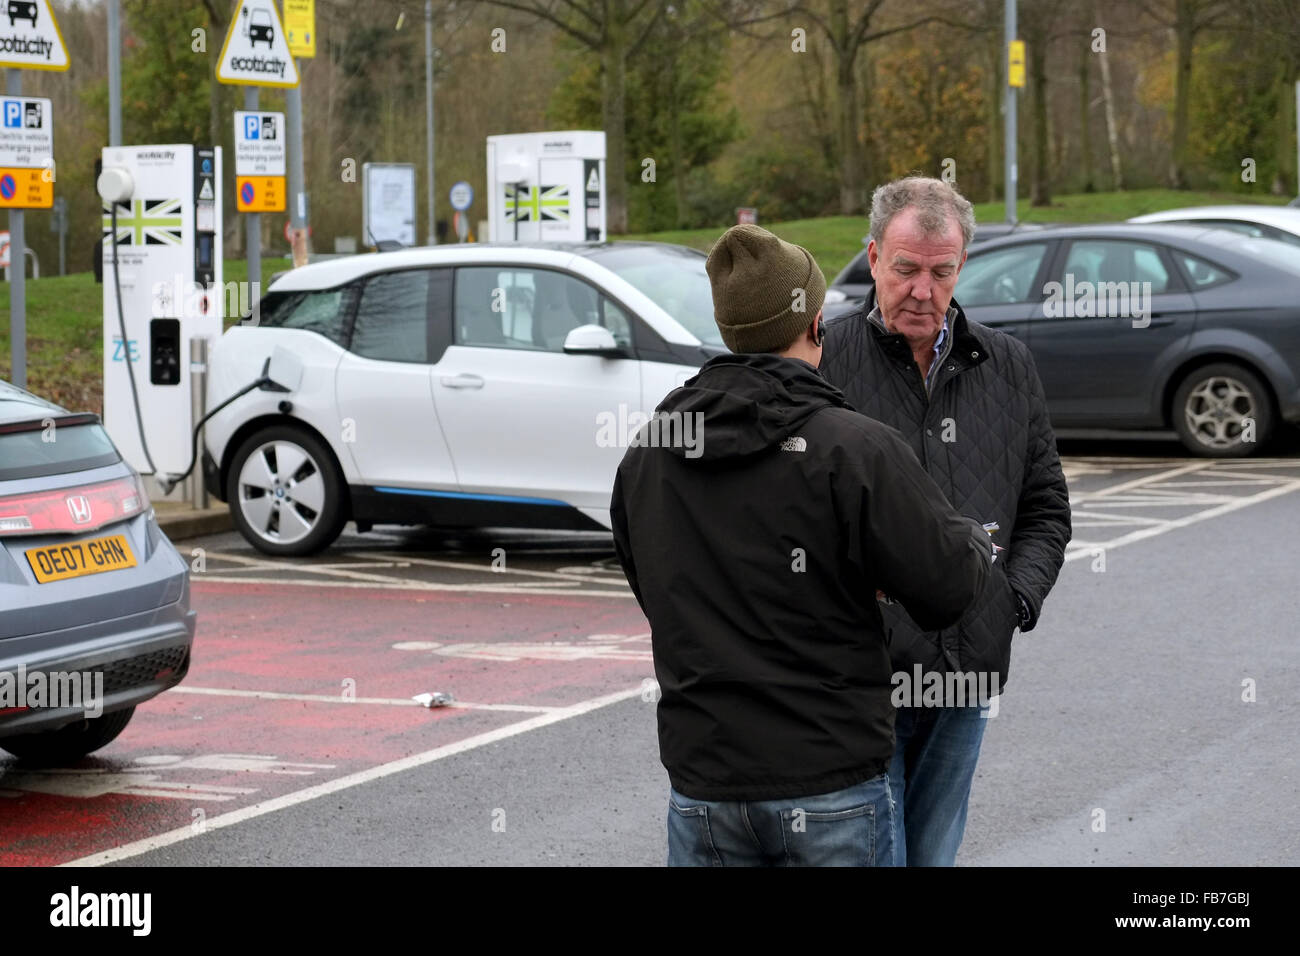 Jeremy Clarkson &  Producer filming at Reading Service Station, England, on 24th November 2015, for the new Amazon Prime show. Stock Photo